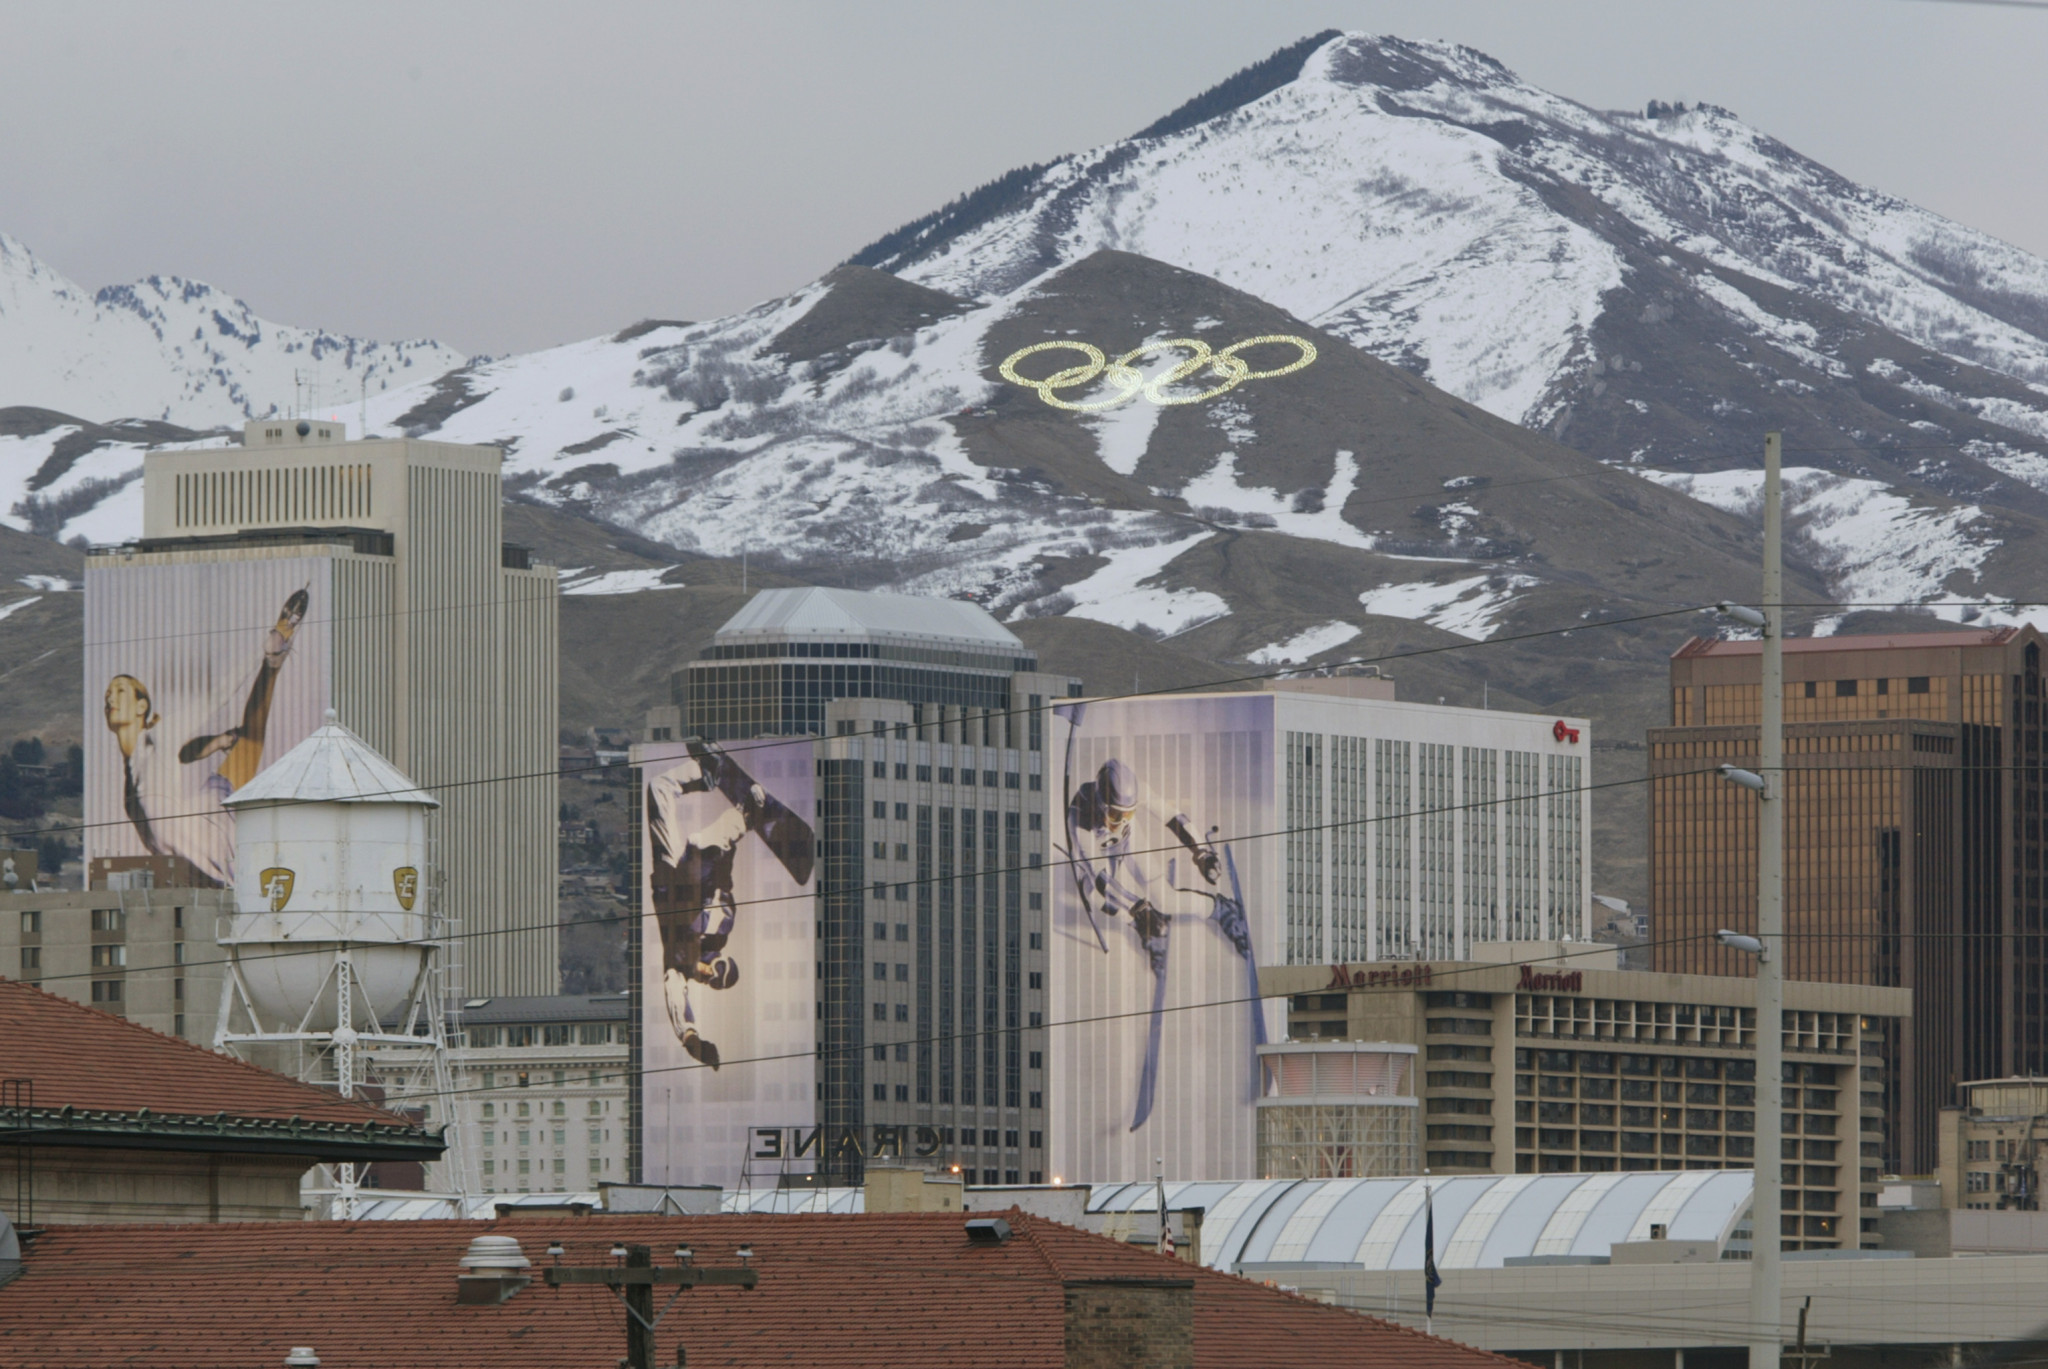 Salt Lake City previously hosted the Winter Olympics and Paralympics in 2002 ©Getty Images